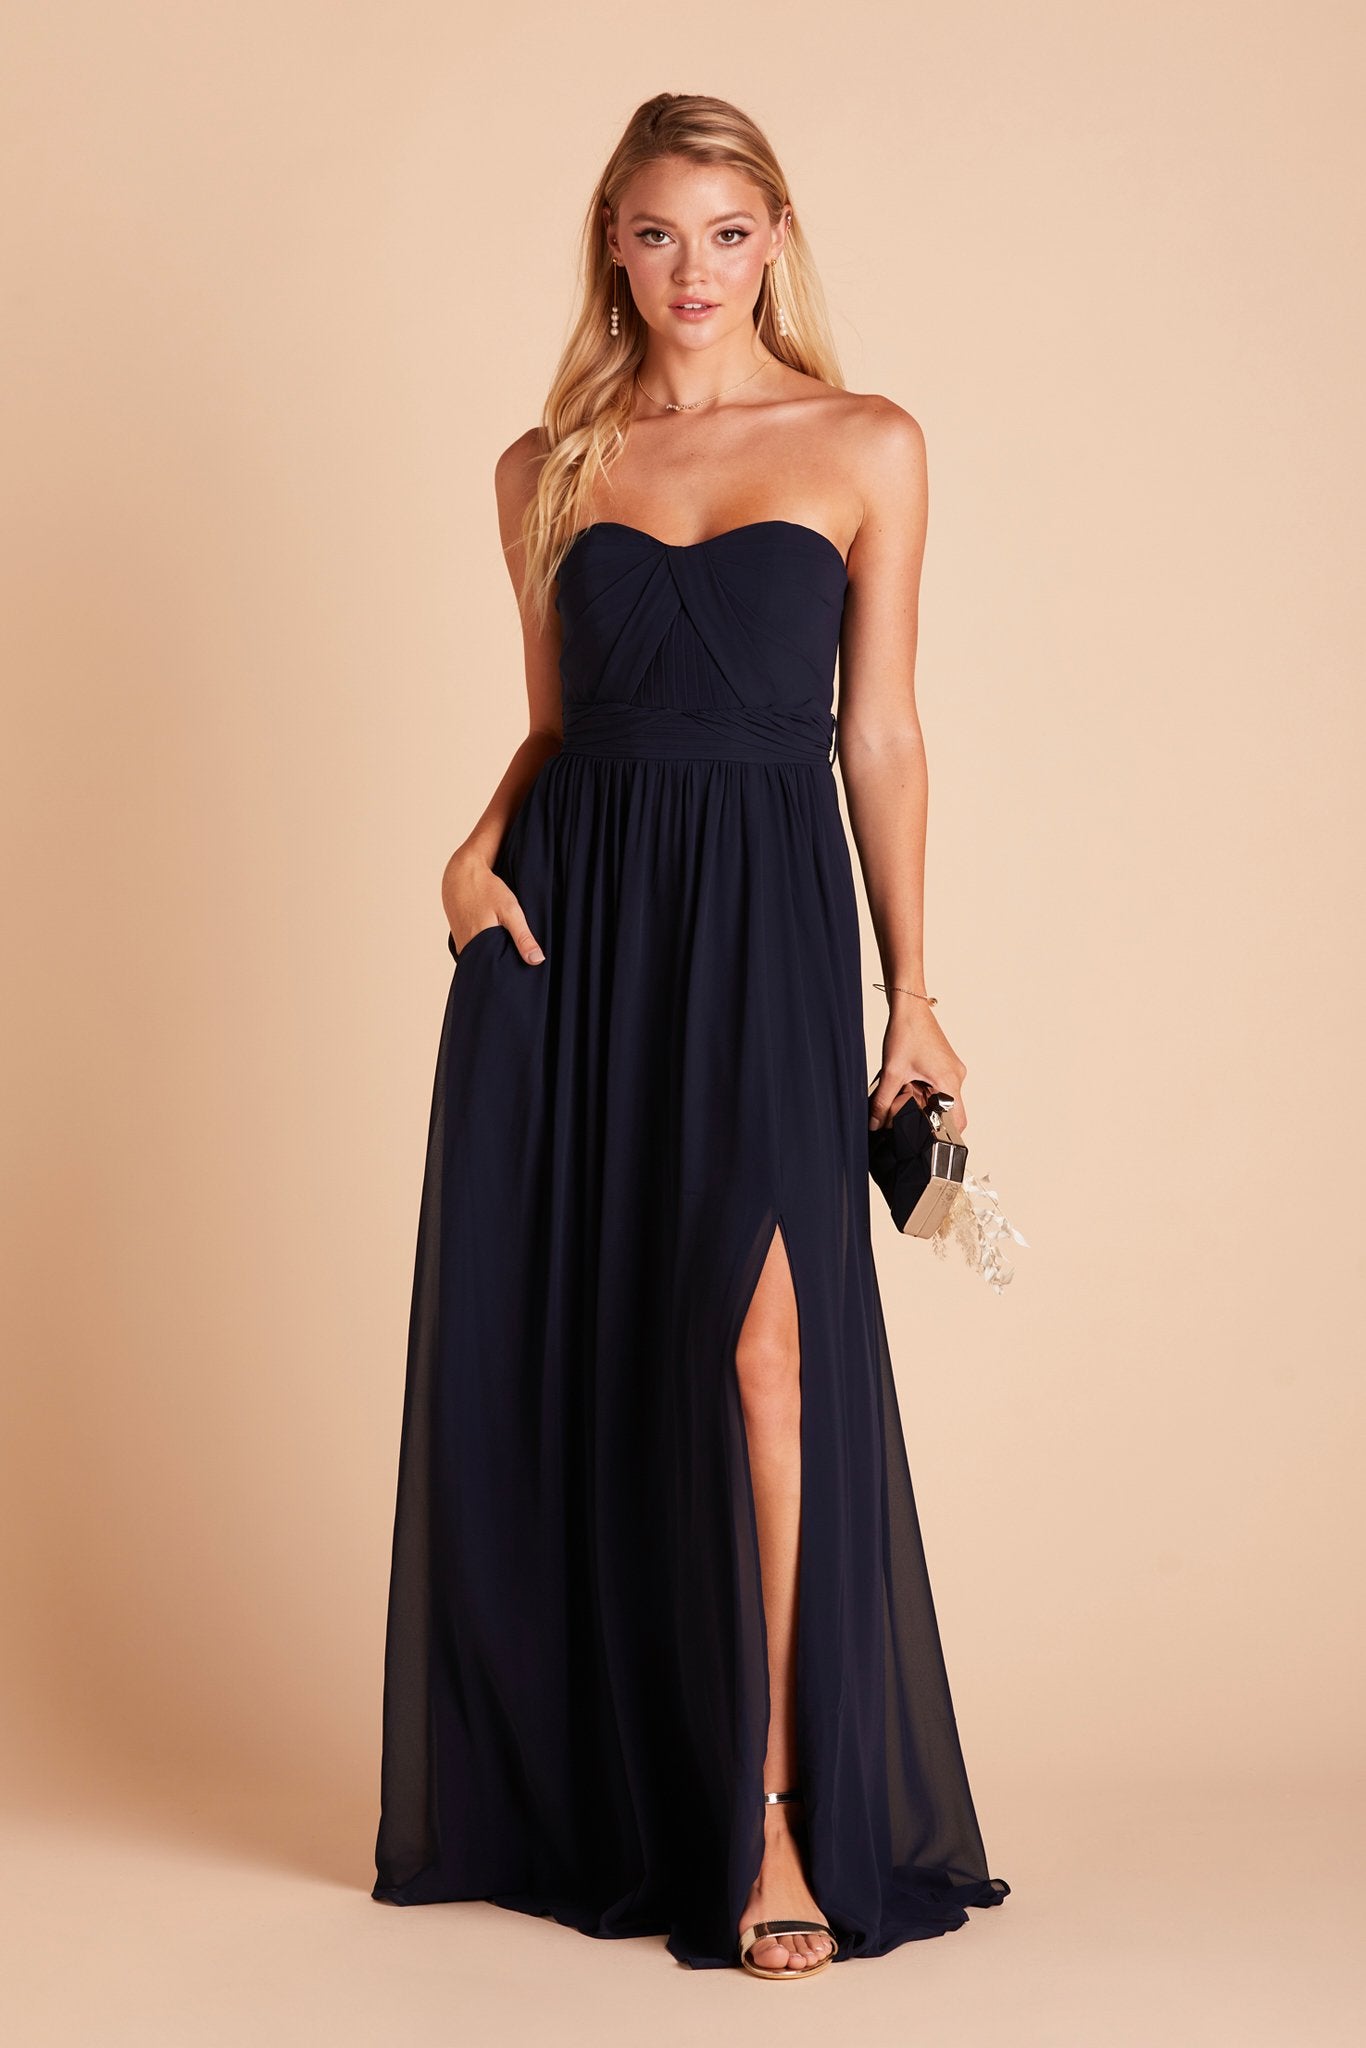 Grace convertible bridesmaid dress in navy blue chiffon with slit by Birdy Grey, front view with hand in pocket